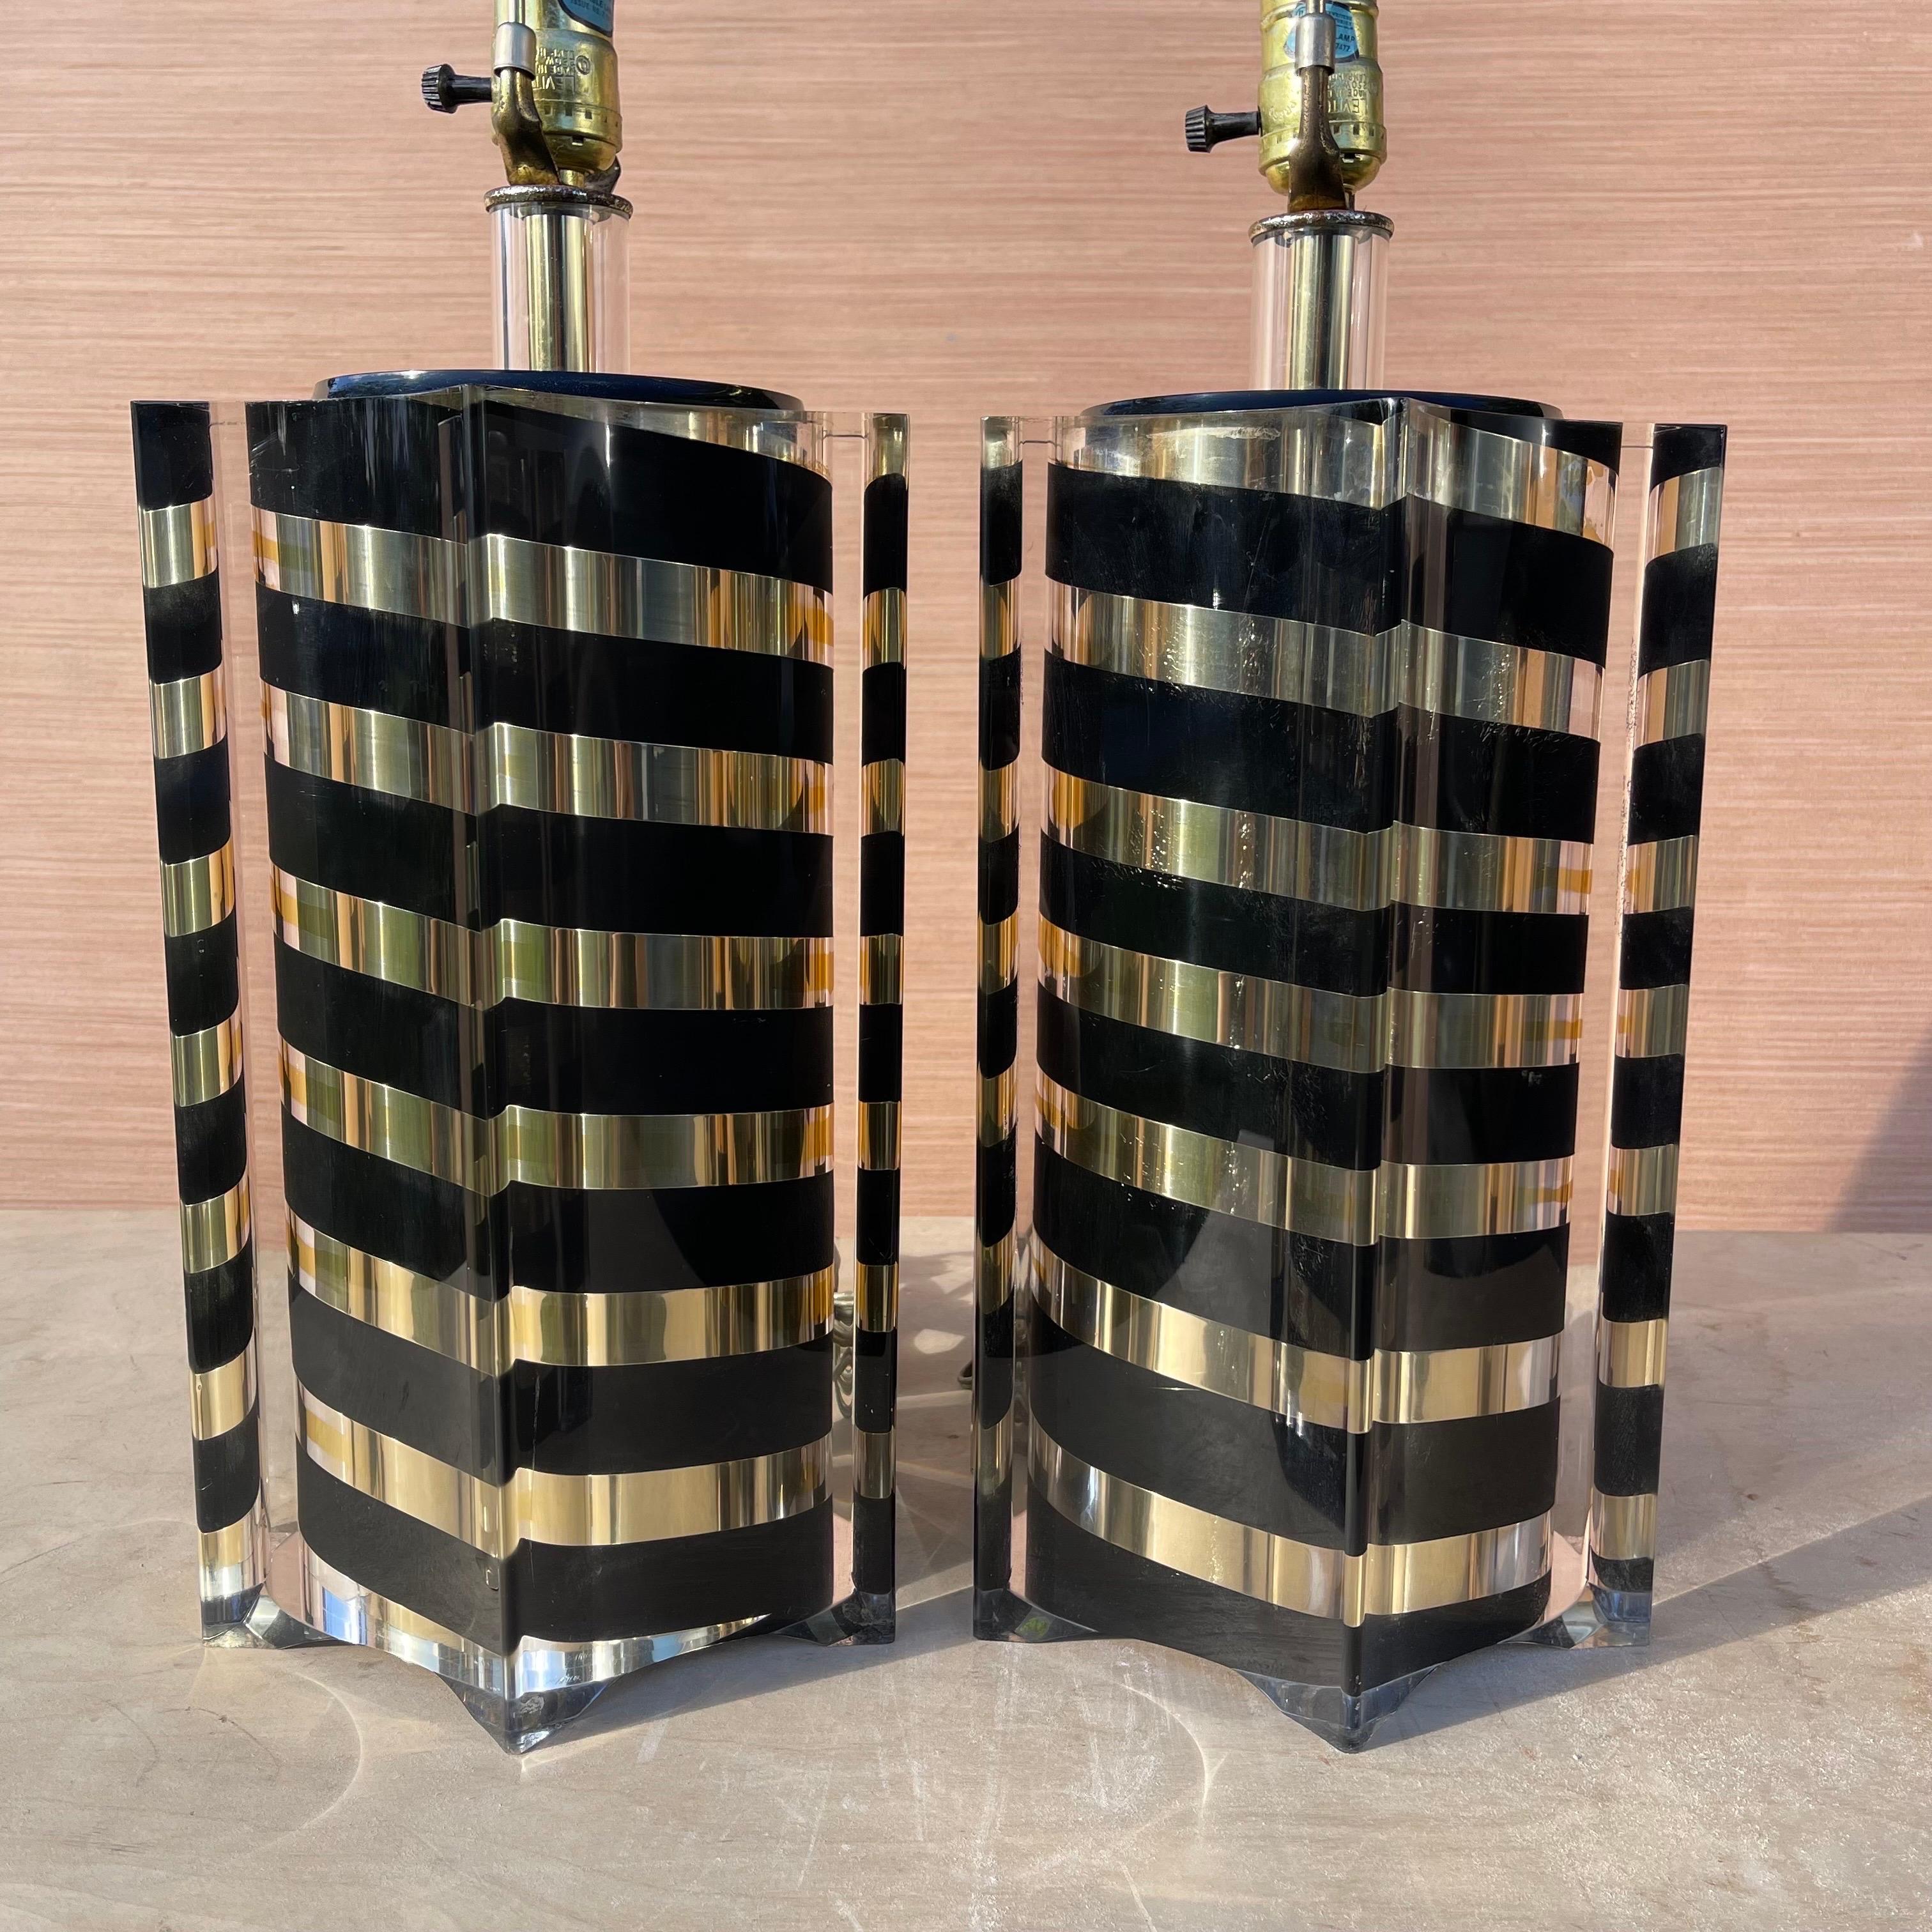 Fabulous pair of black and gold striped lucite lamps, made in Italy by Smart Italia Roma.